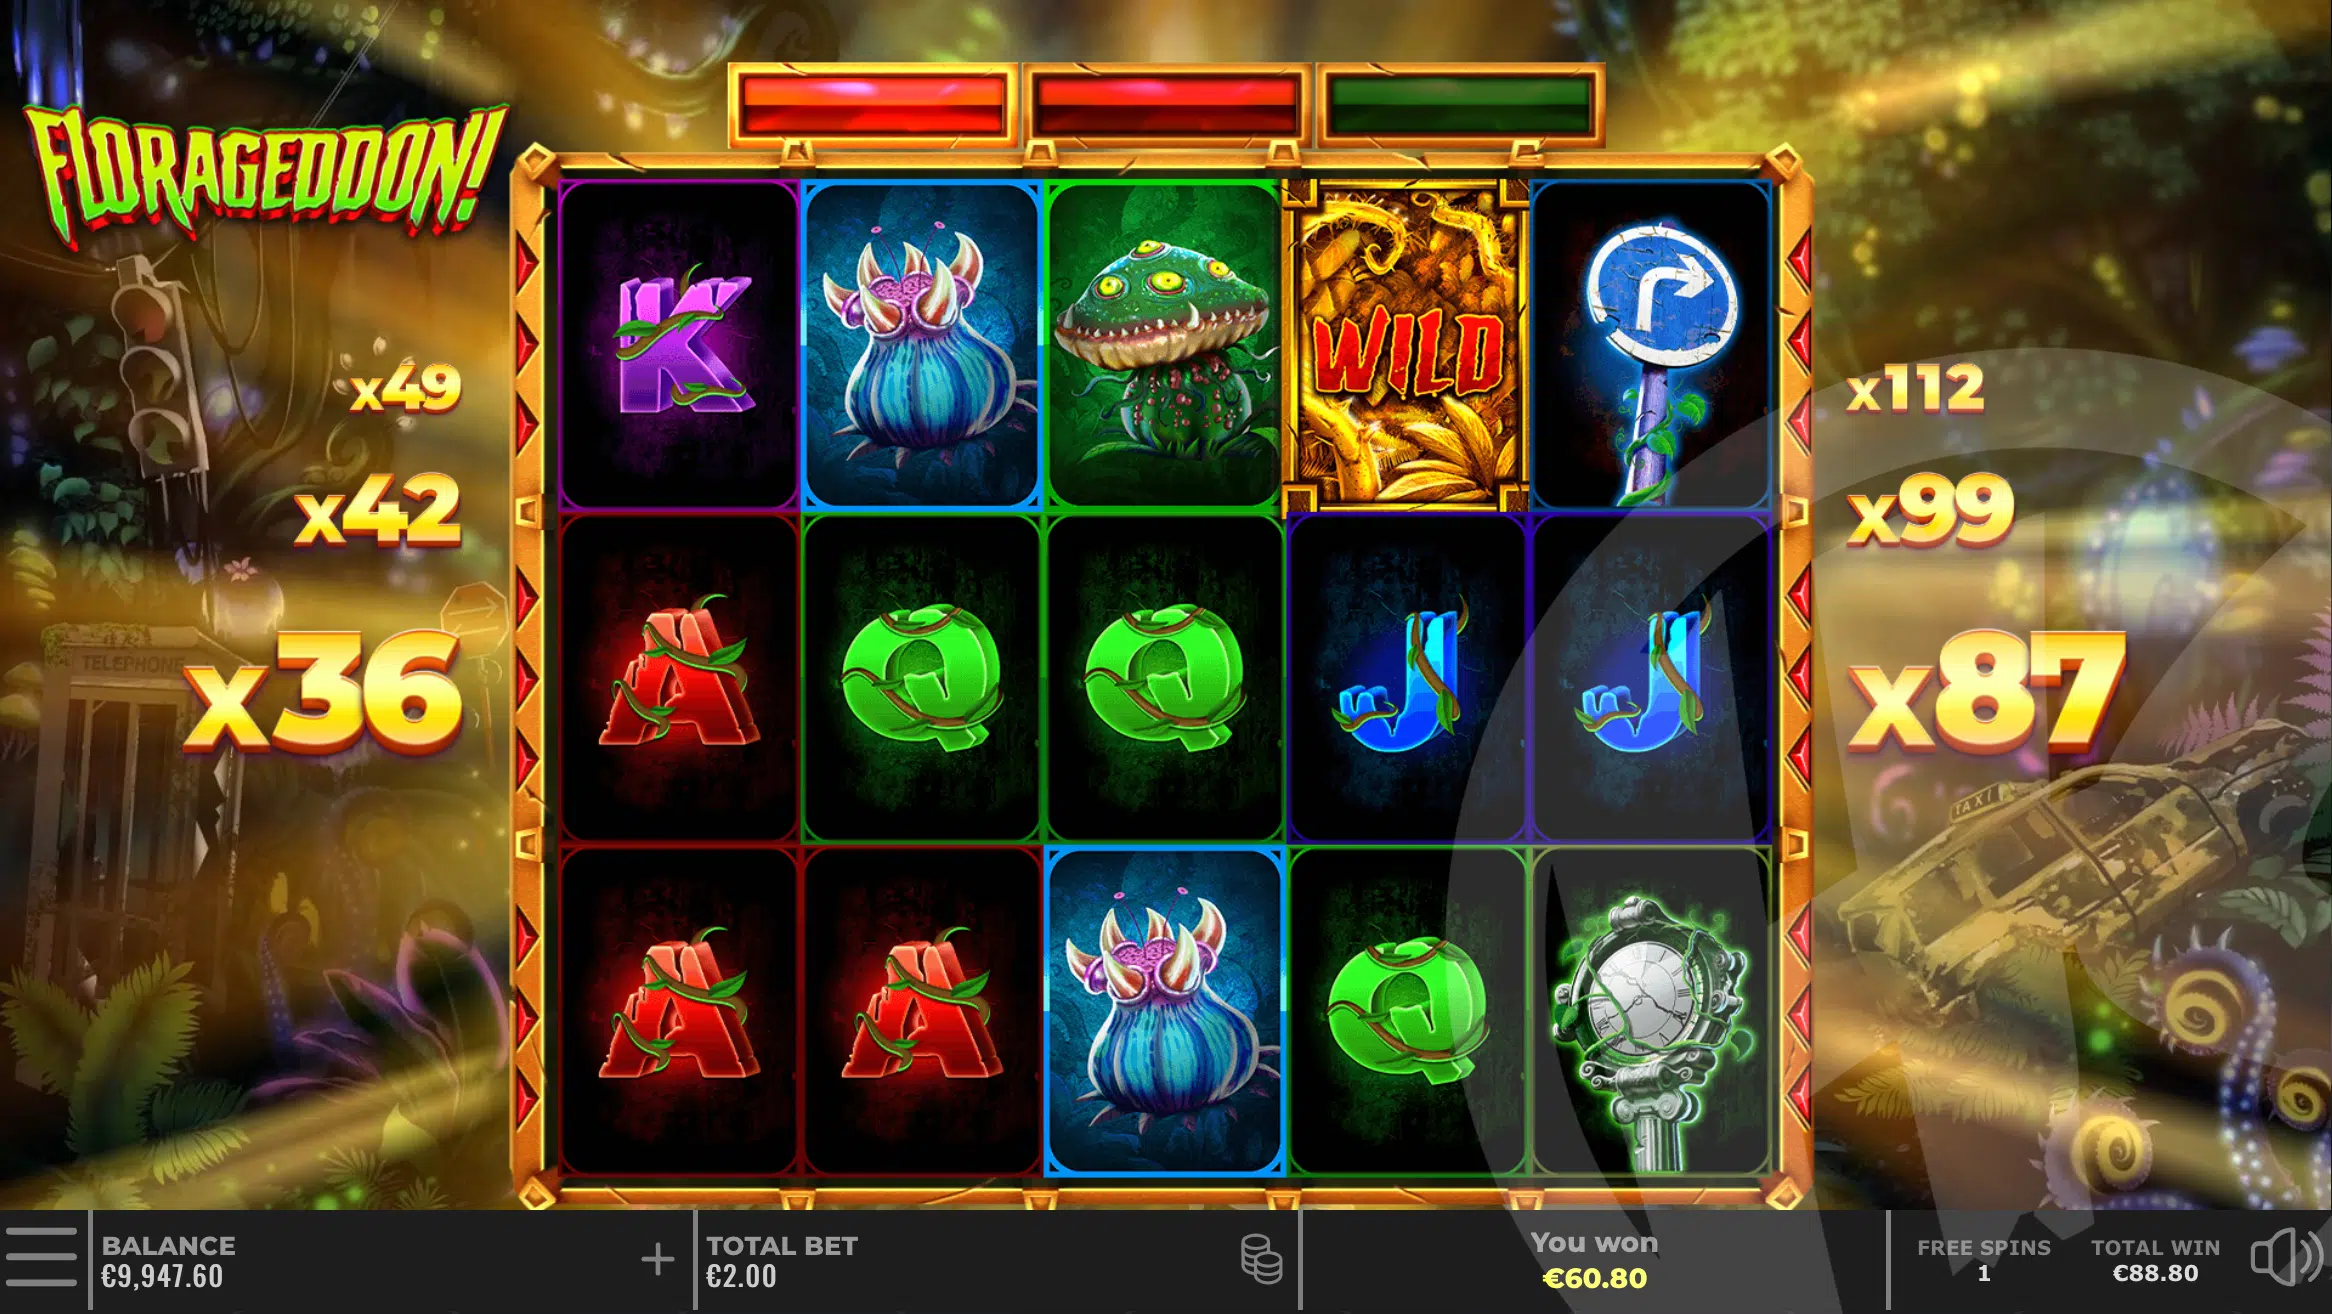 Multipliers Do Not Reset During Free Spins